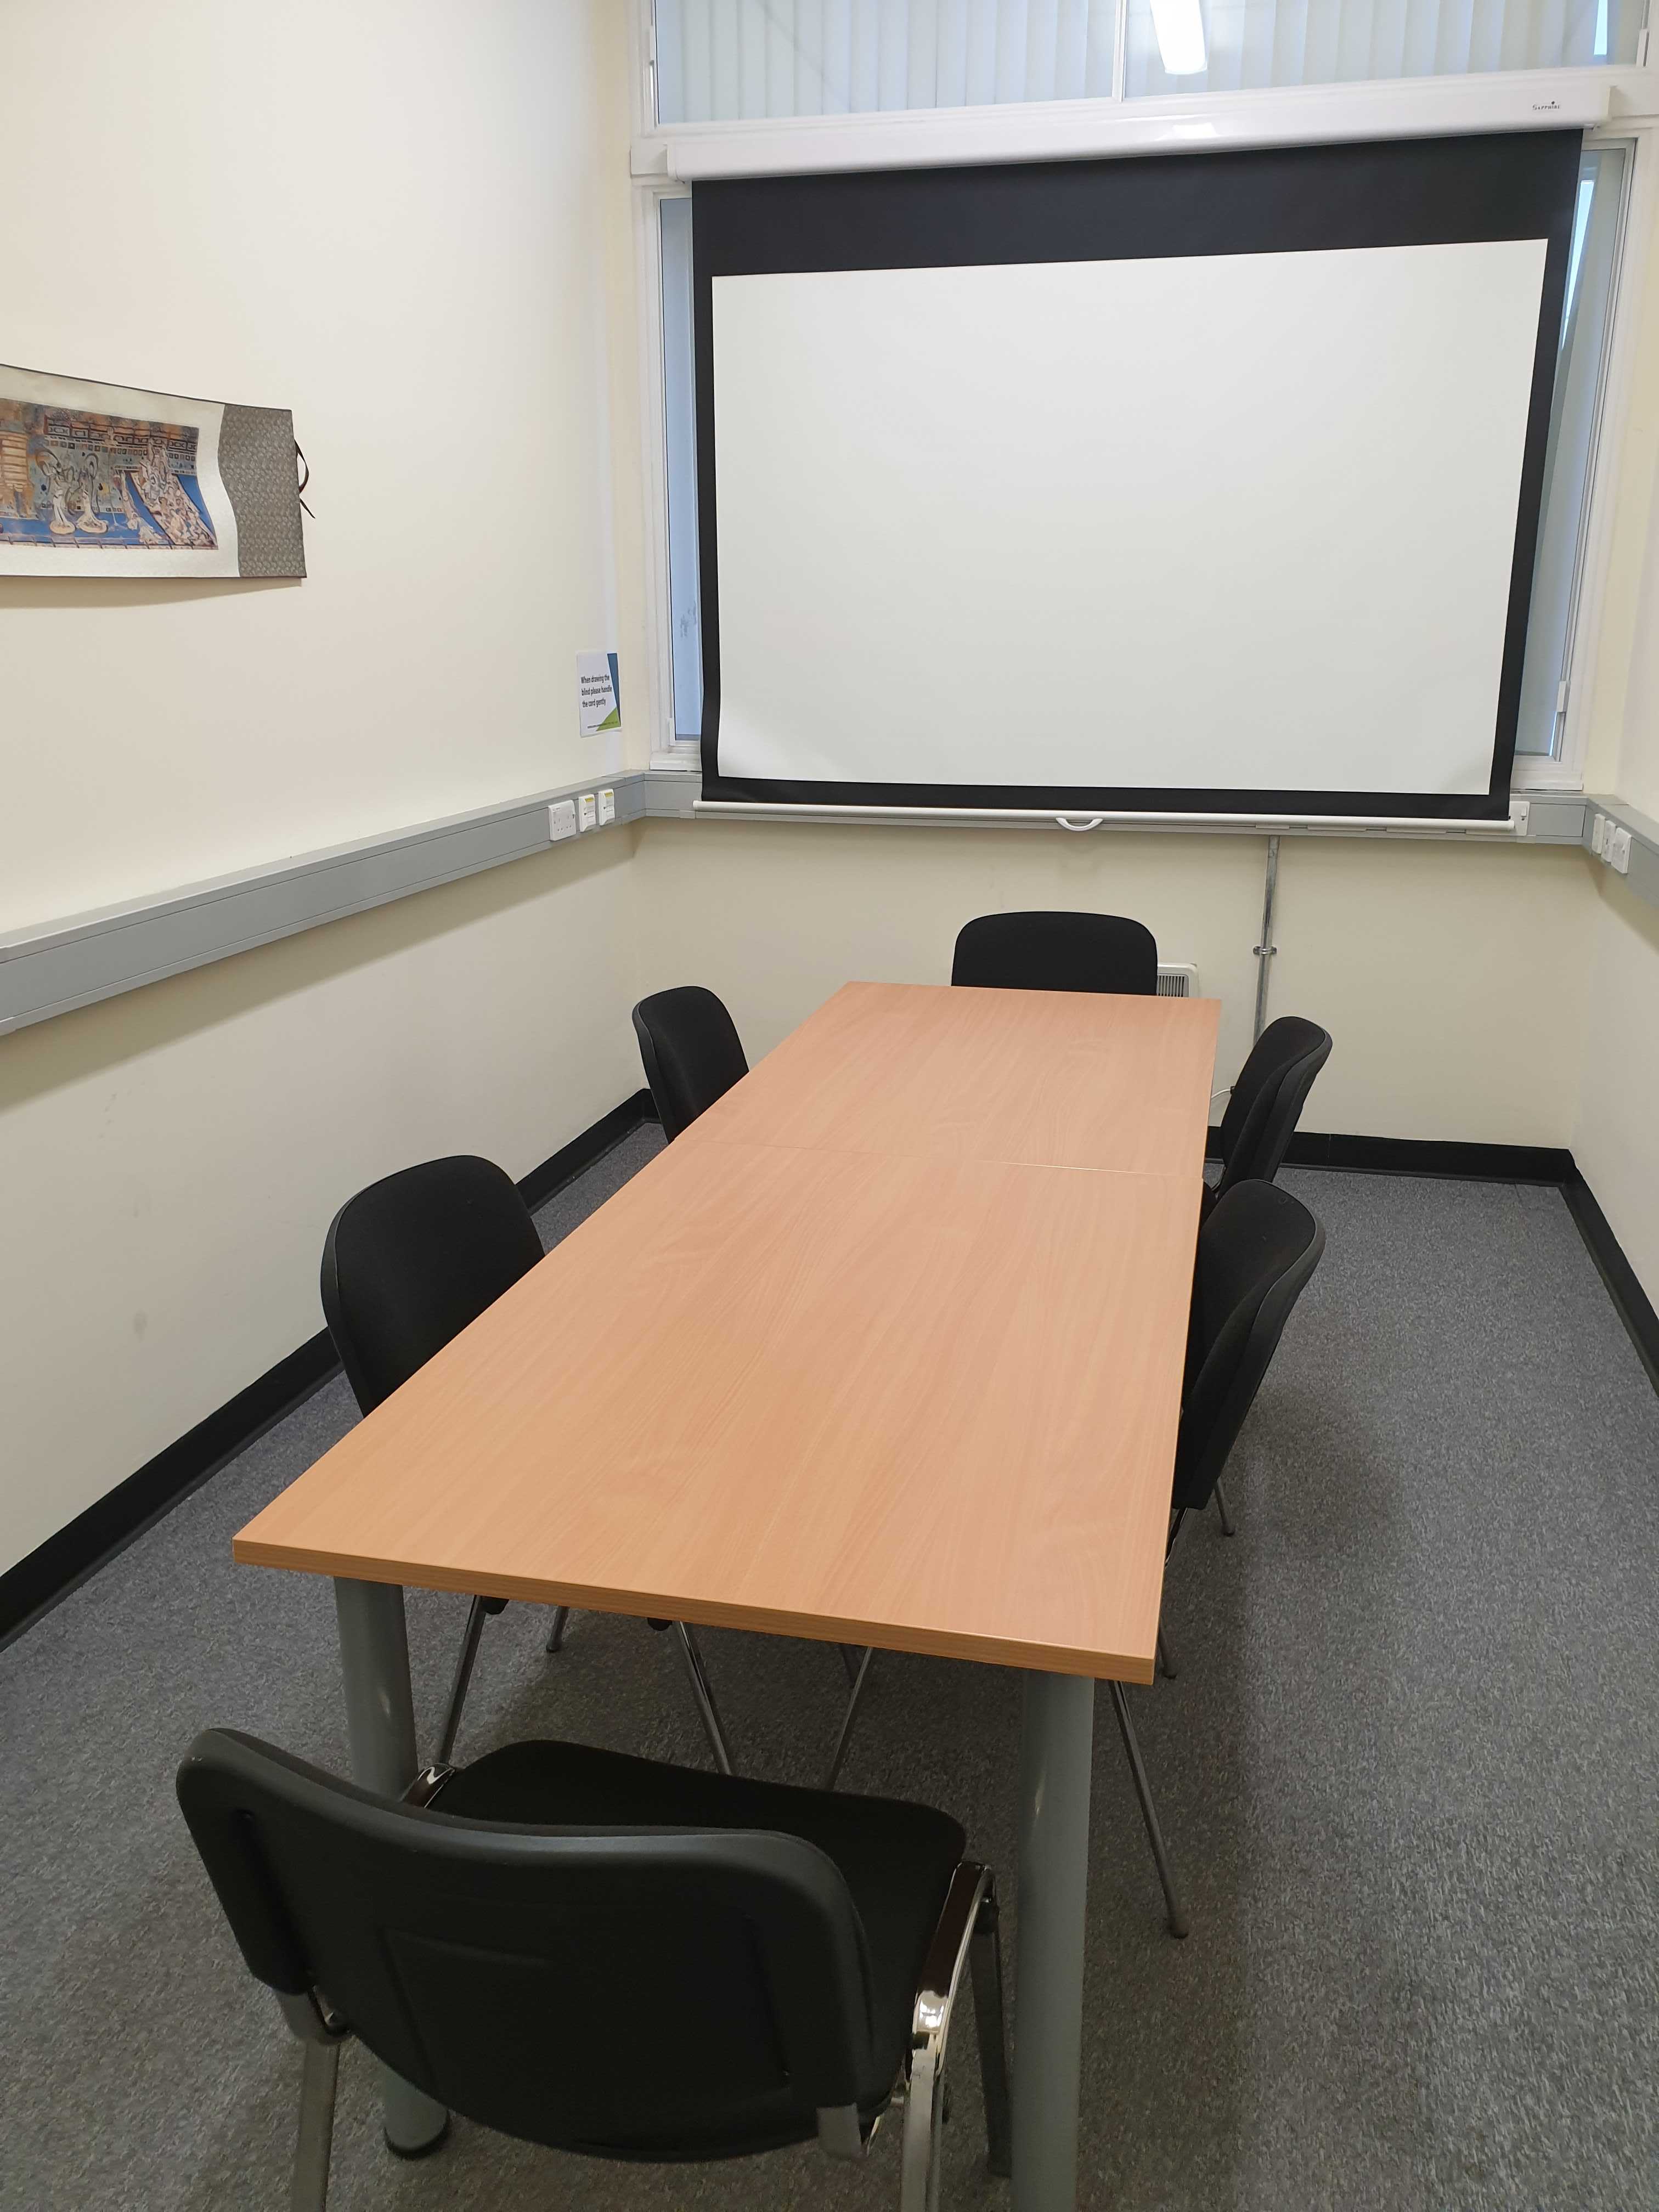 Photograph showing the standard layout of the Biomedical Campus Committee Room - a room with six chairs around a large boardroom table.